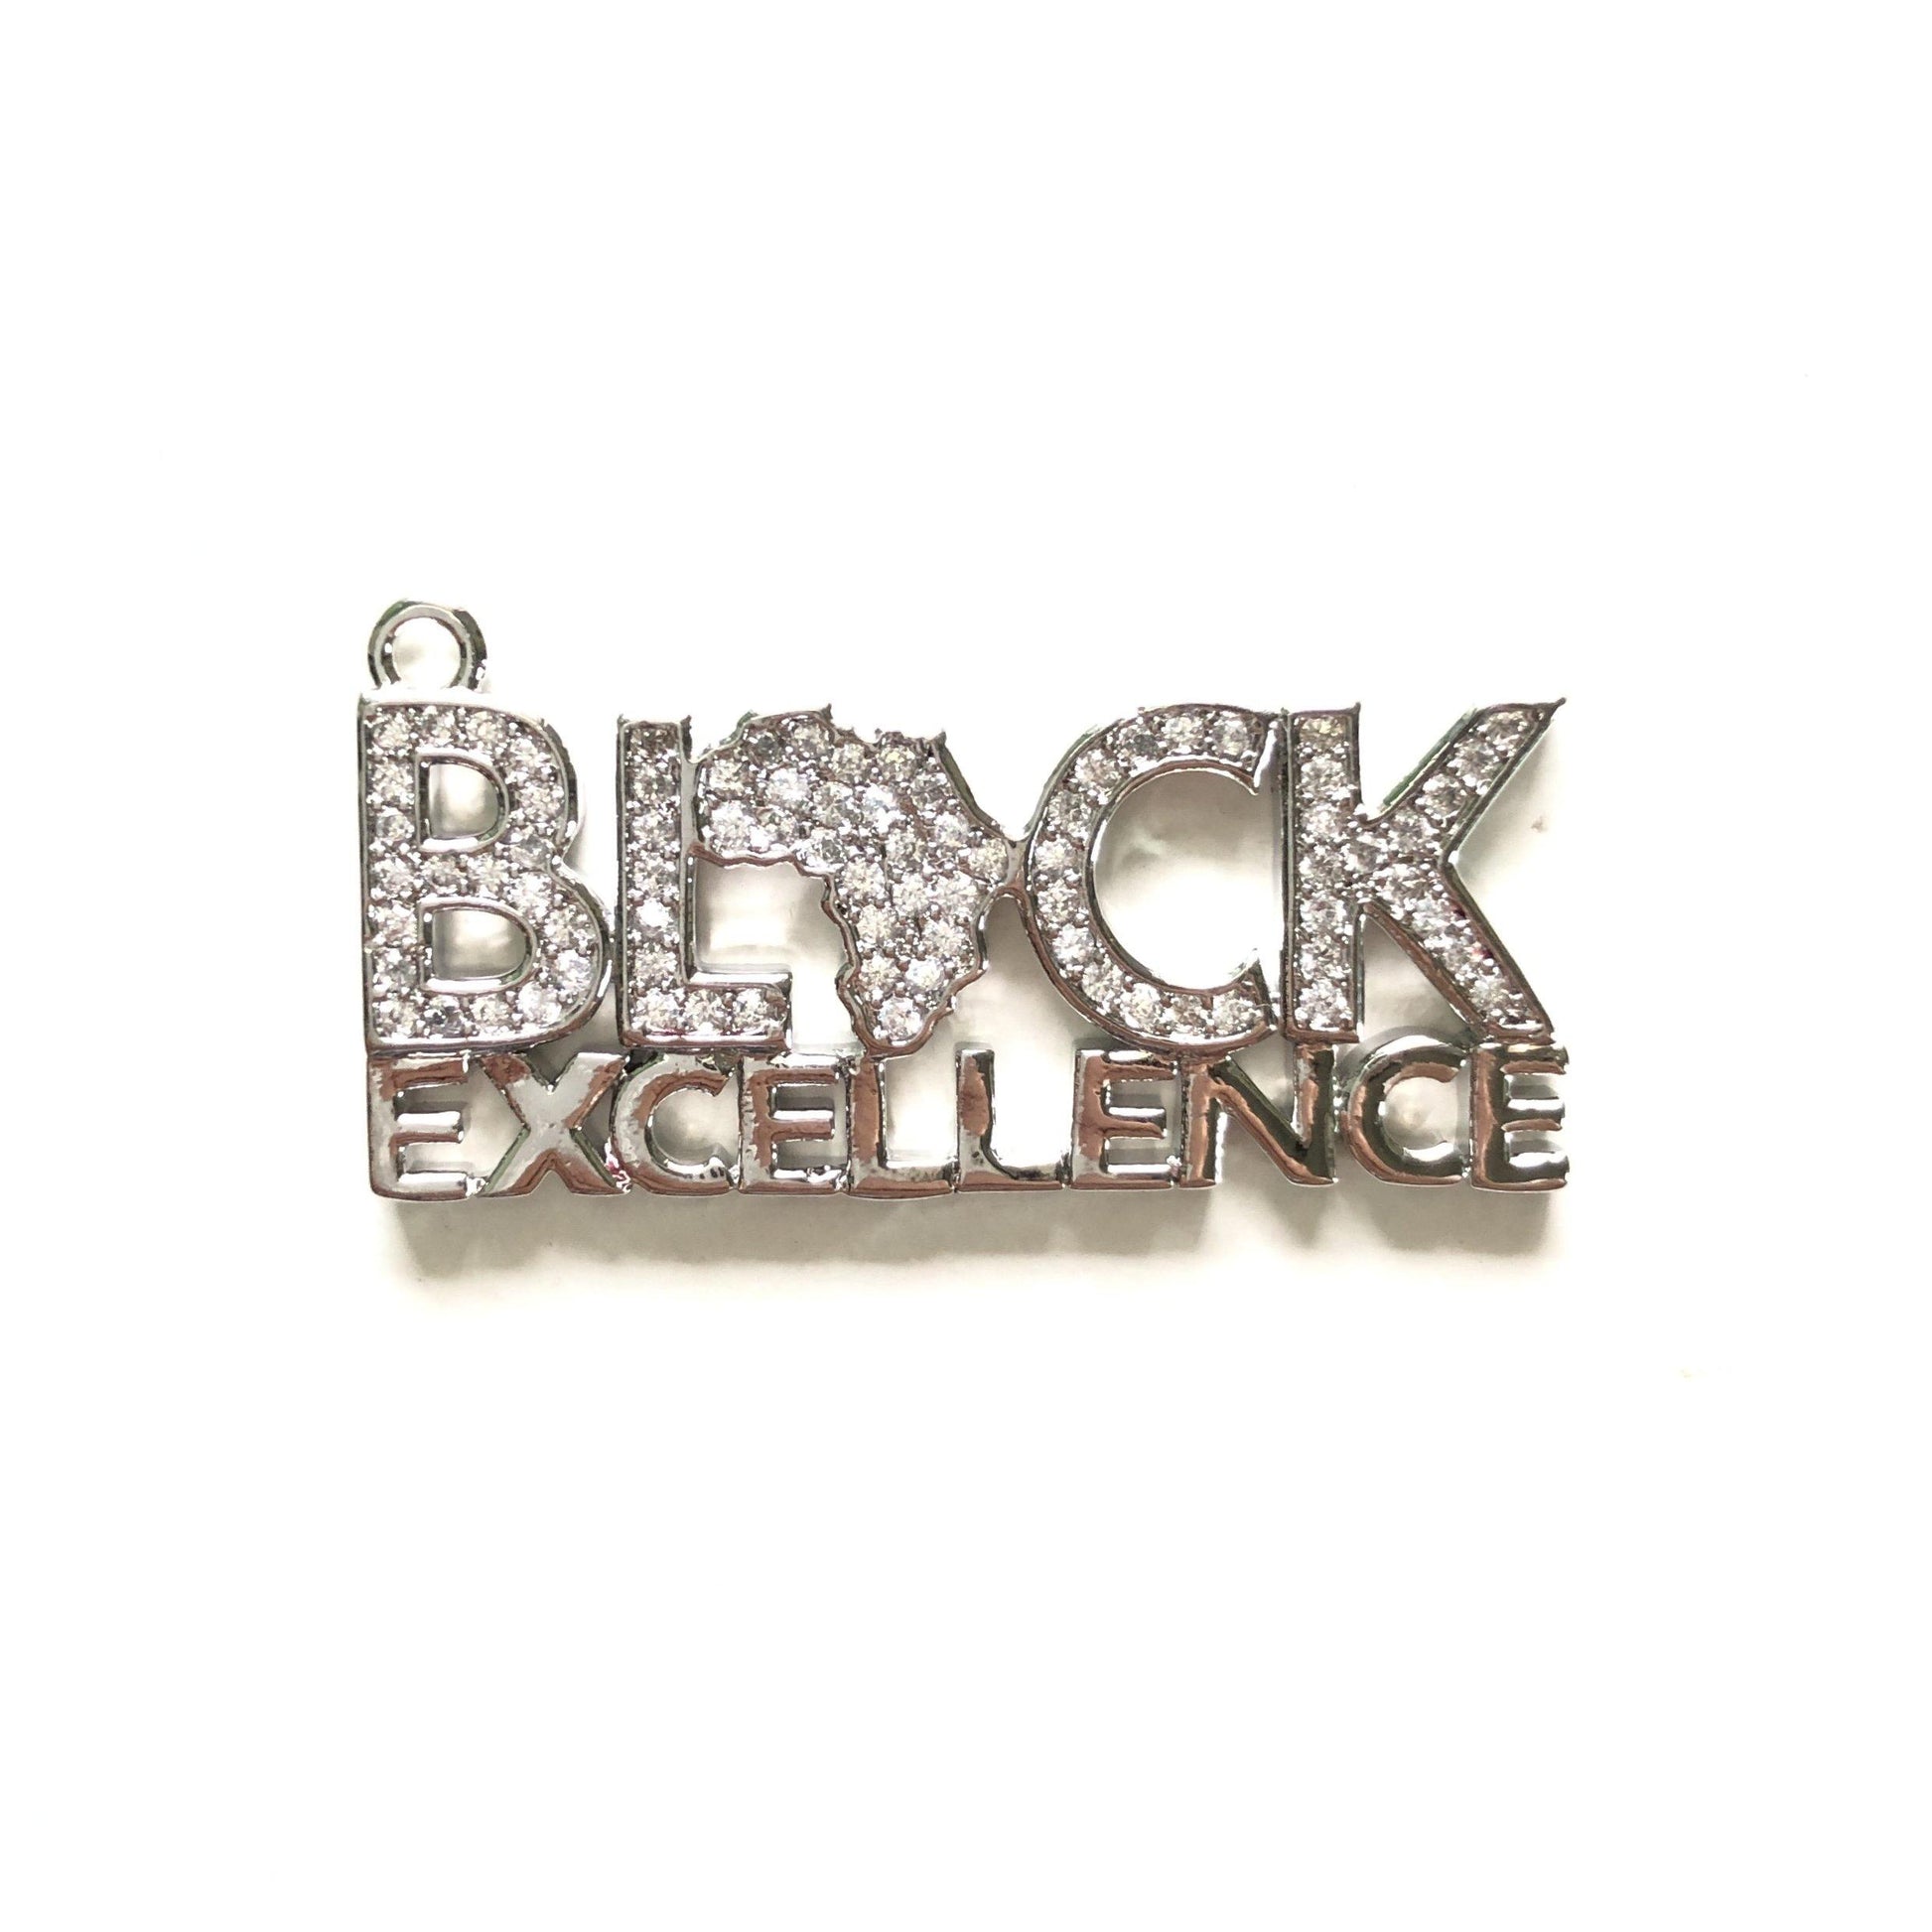 10pcs/lot 34.5*15mm CZ Paved Black Excellence Charms Black History Month Juneteenth Awareness Silver CZ Paved Charms Juneteenth & Black History Month Awareness Words & Quotes Charms Beads Beyond